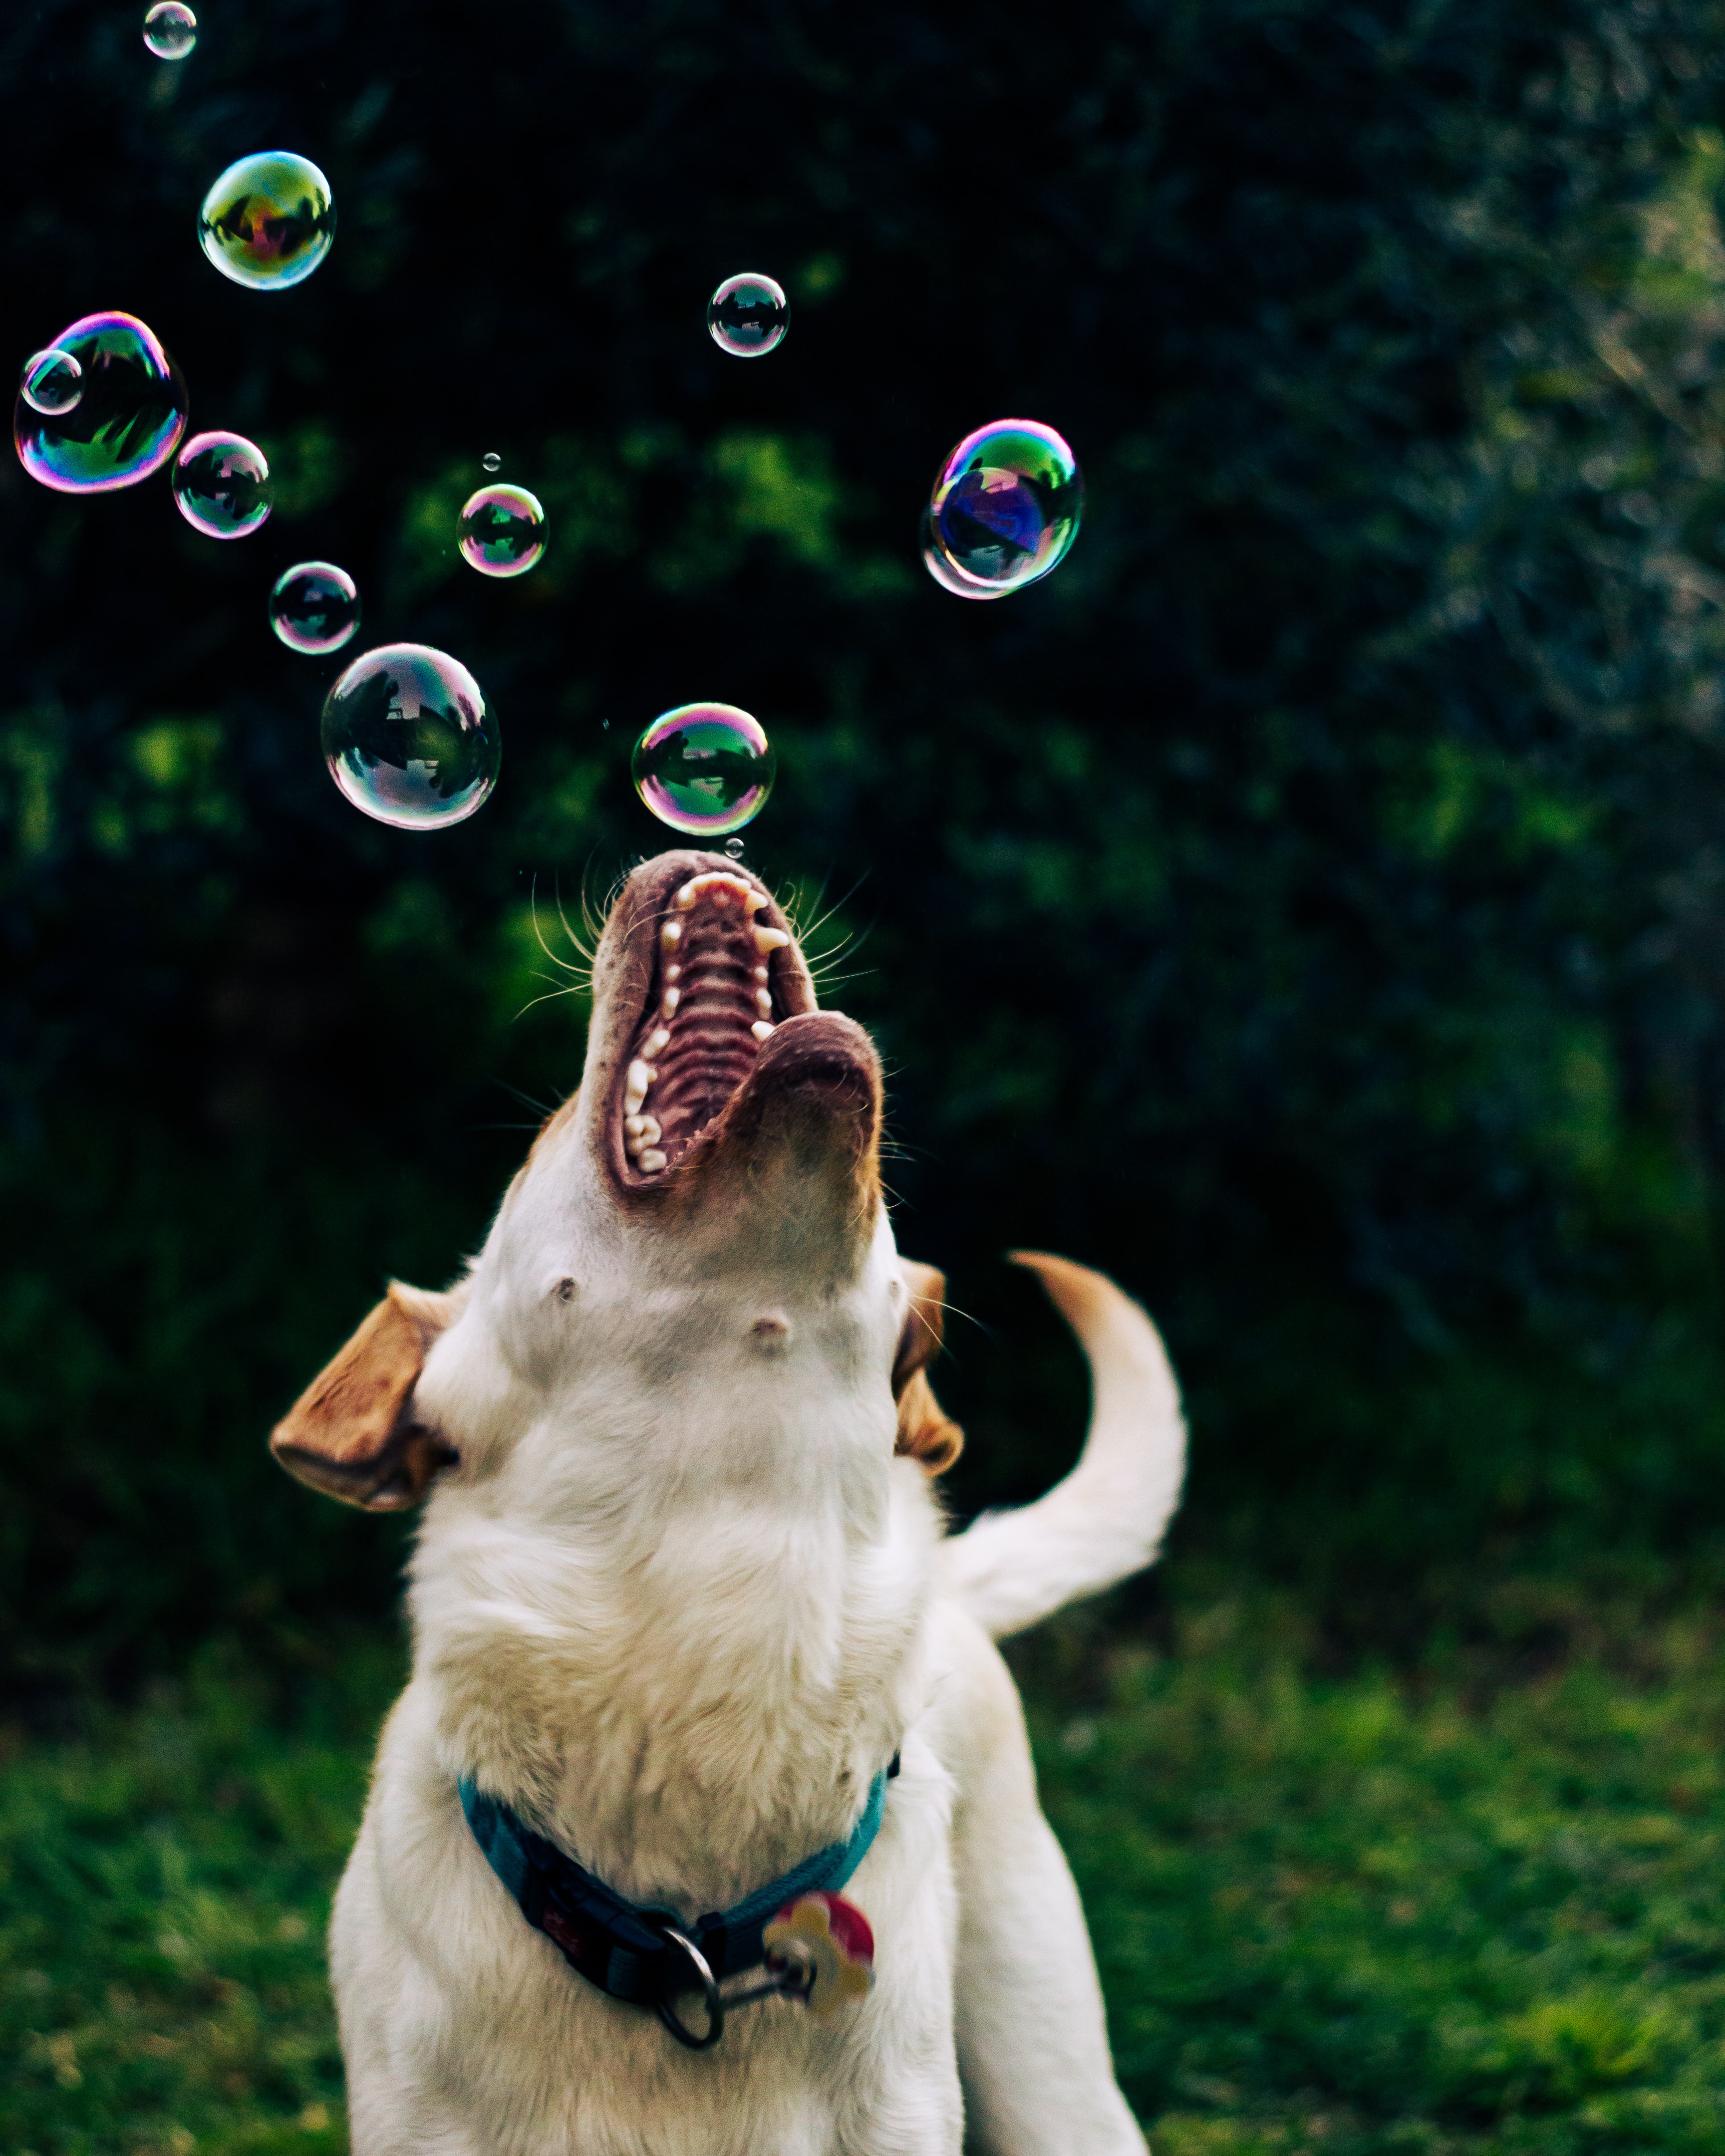 hilarious dog playing with bubbles